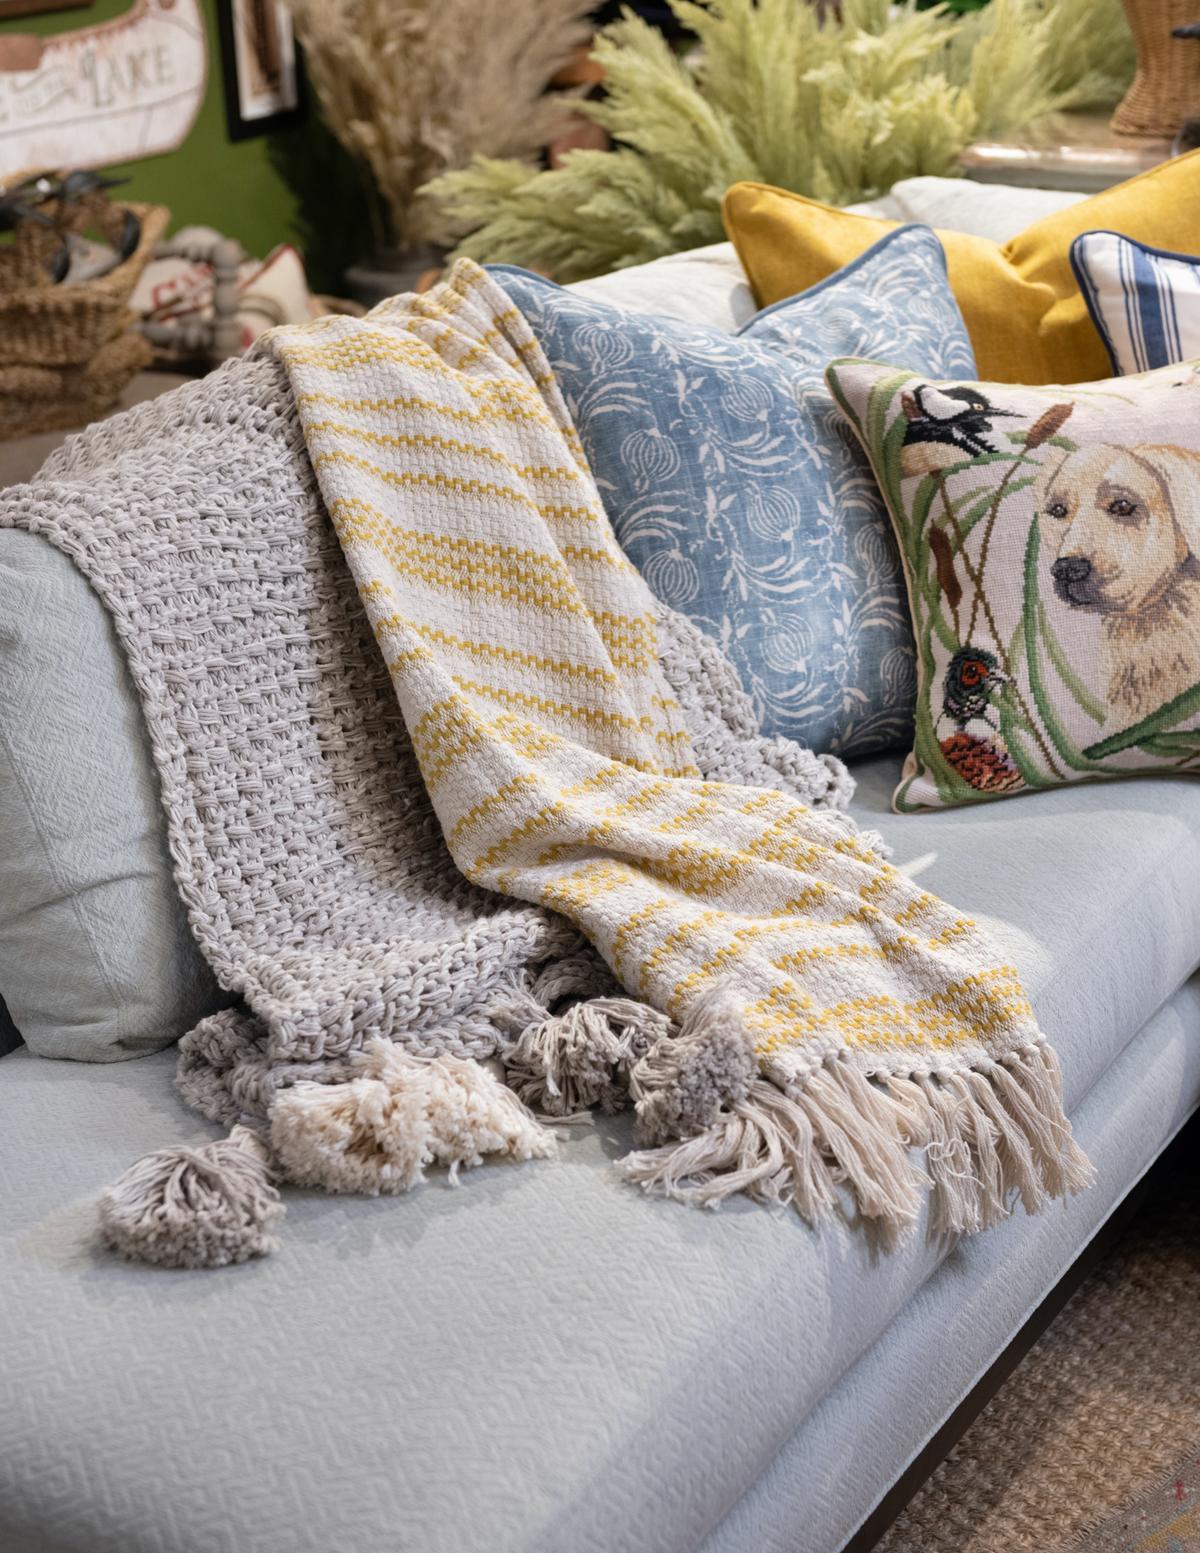 Two layered throw blankets make for a snuggly and inviting couch display. (Handout/TNS)